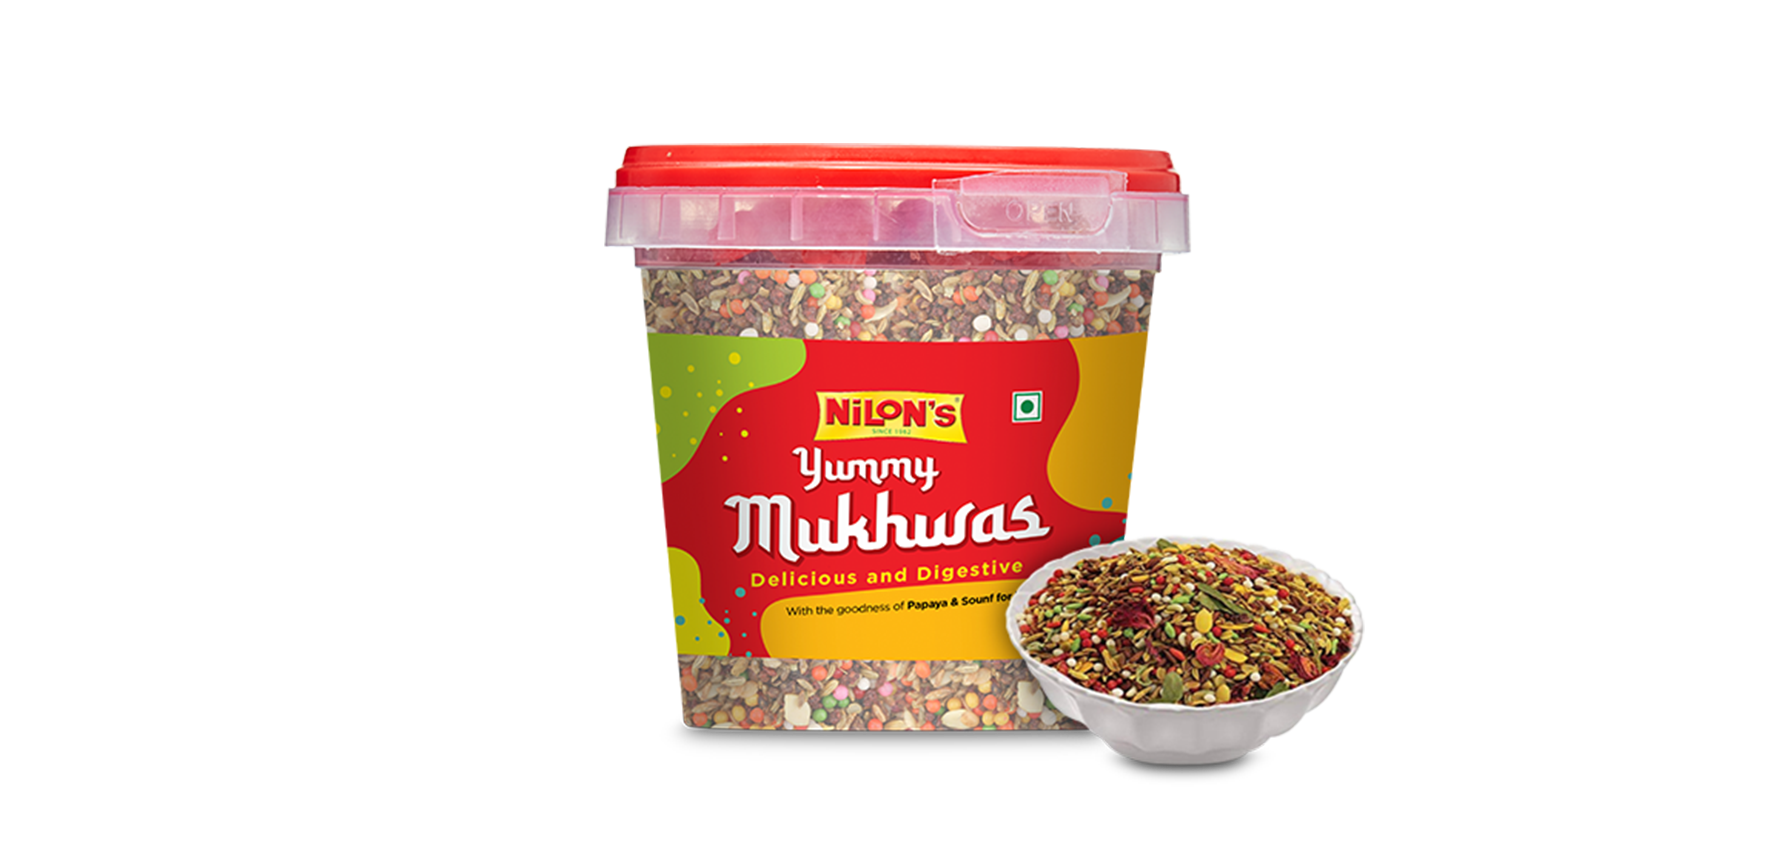 Tooty Fruity Mukhwas